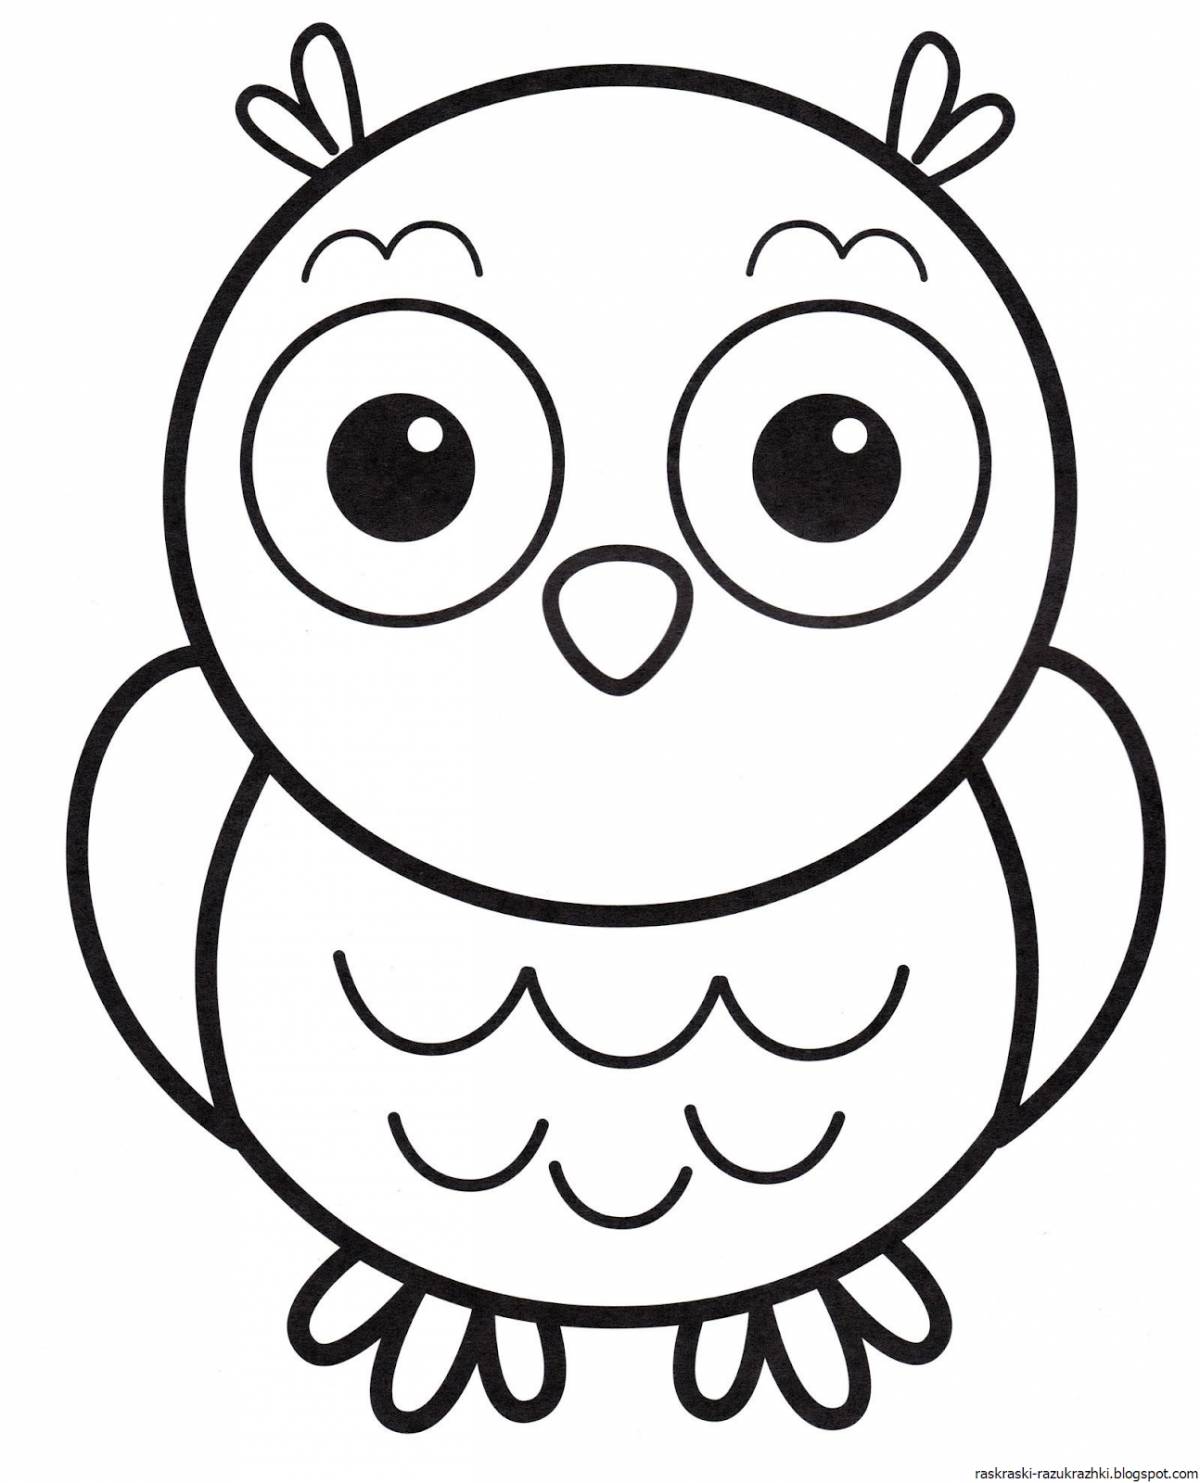 Color-magical coloring page printable drawing for kids